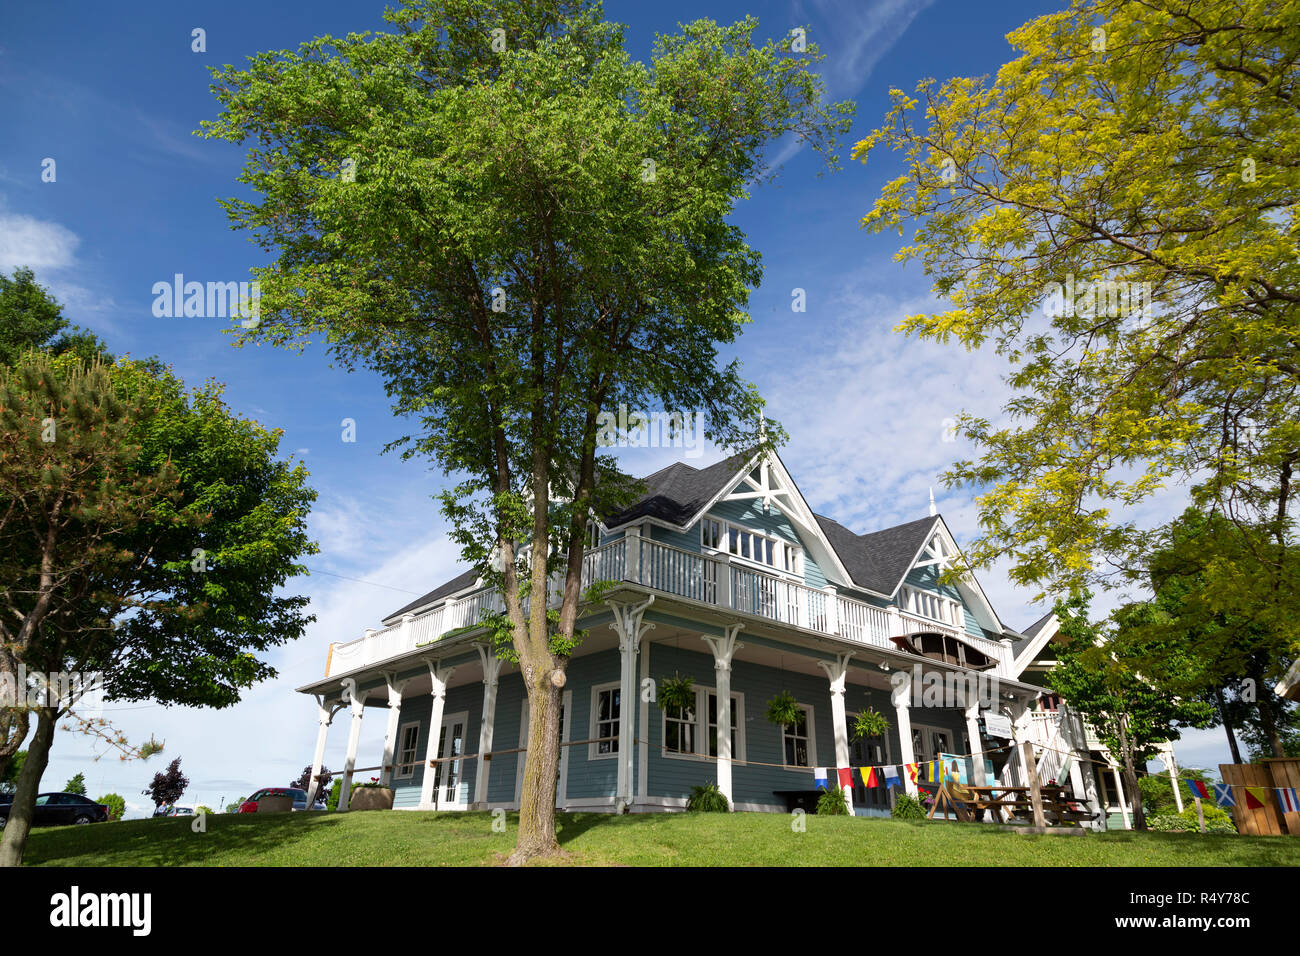 The Arthur Child Heritage Museum of the 1000 Islands at Gananoque in Ontario, Canada. The town is seen as a gateway to the Thousand Islands region, on Stock Photo